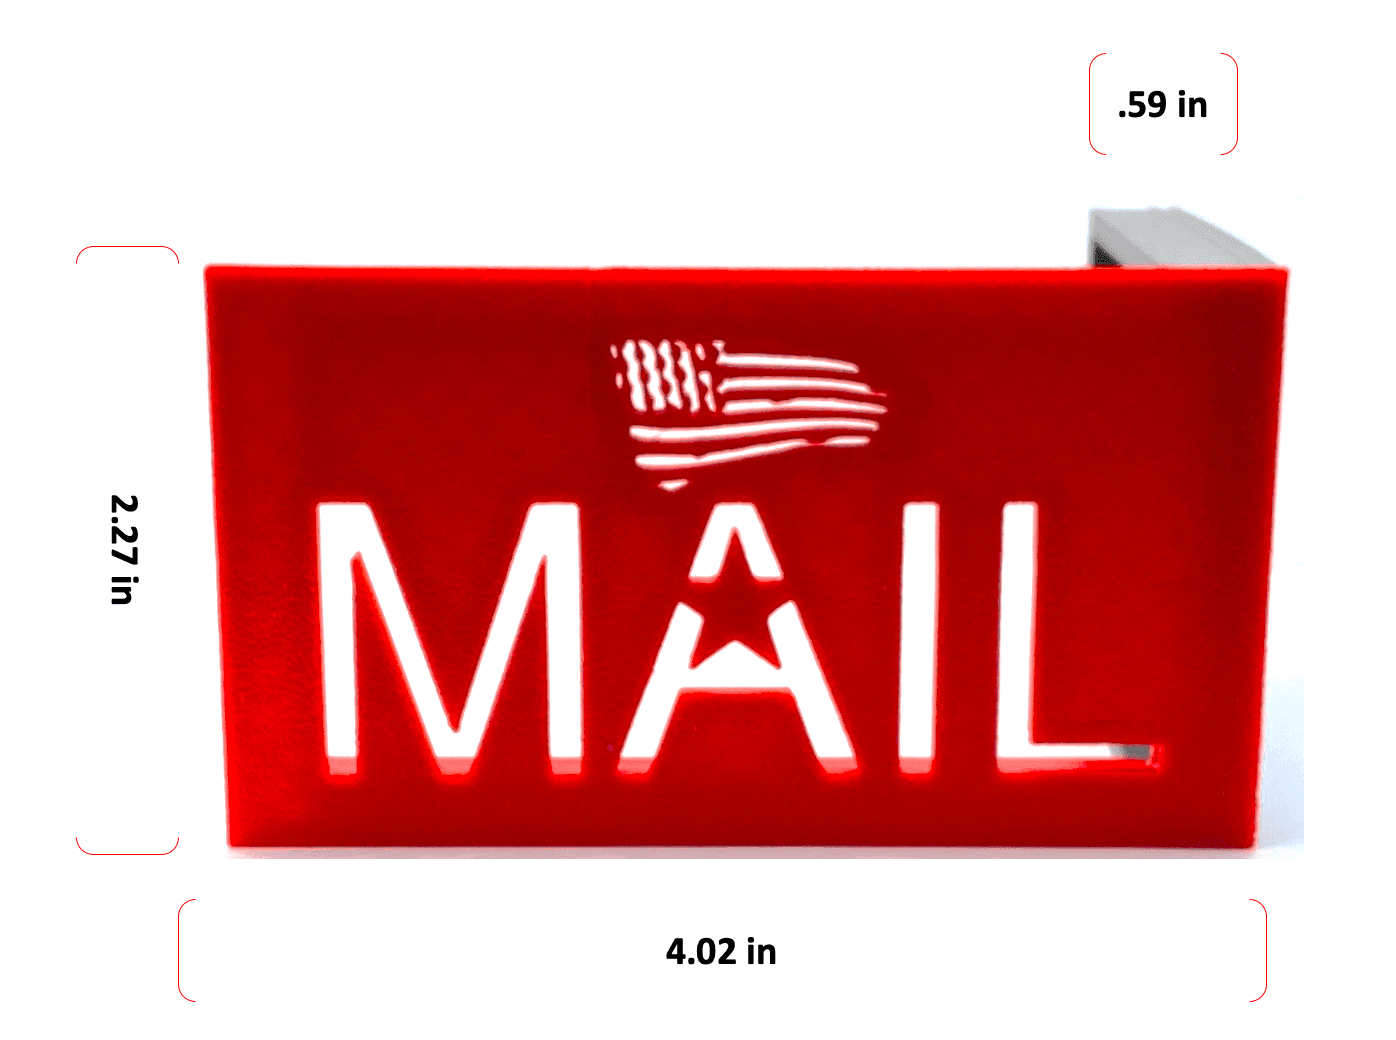 Larger size for better visibility on this mailbox flag for stone and brick mailboxes.